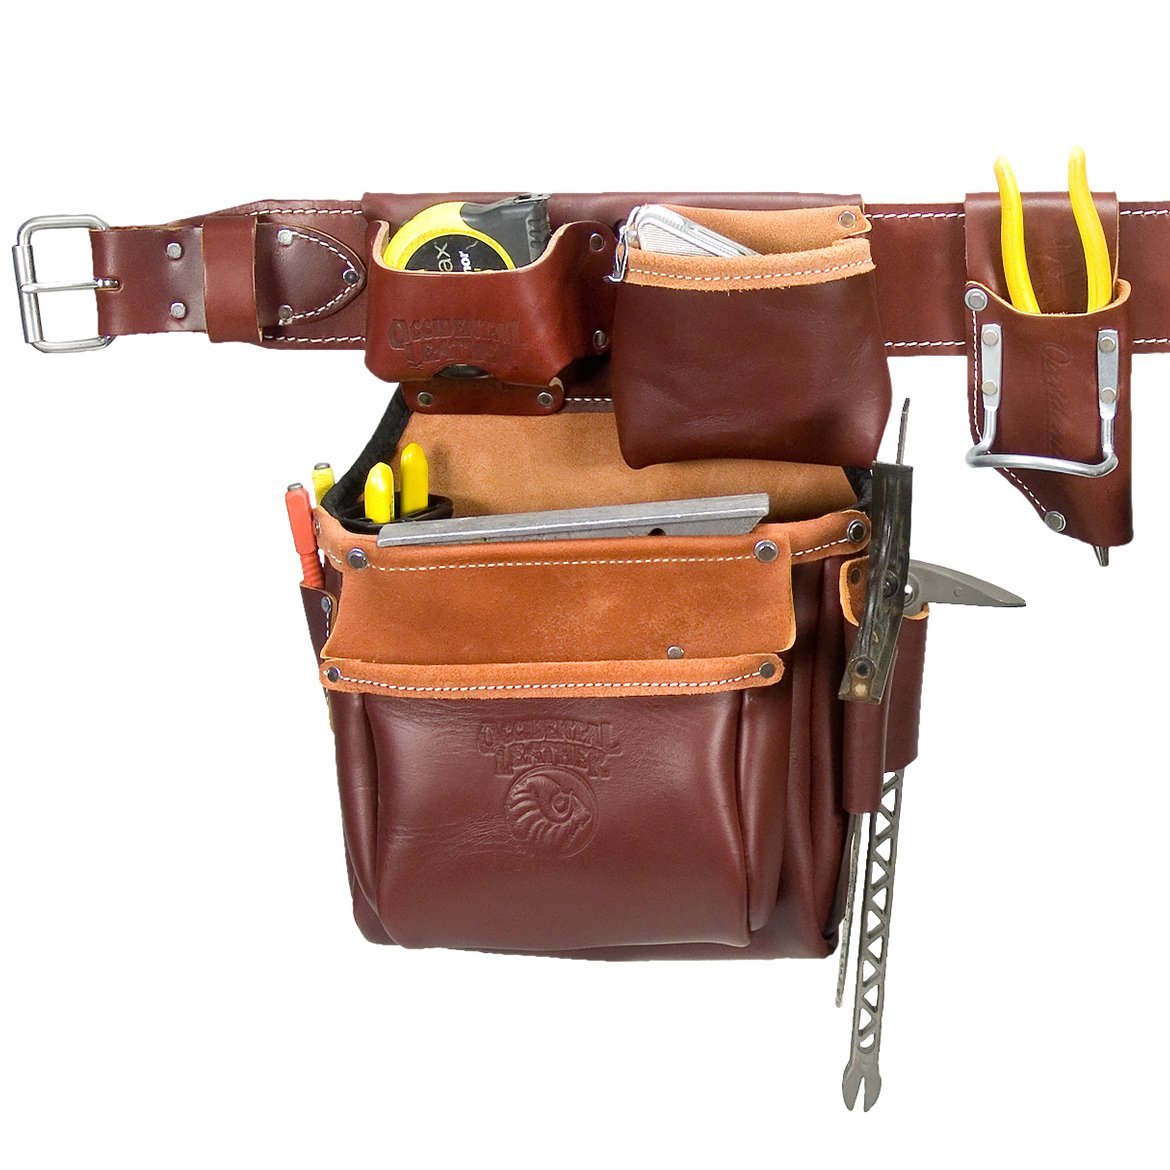 Occidental Leather 5530 LG Stronghold Big Oxy Set